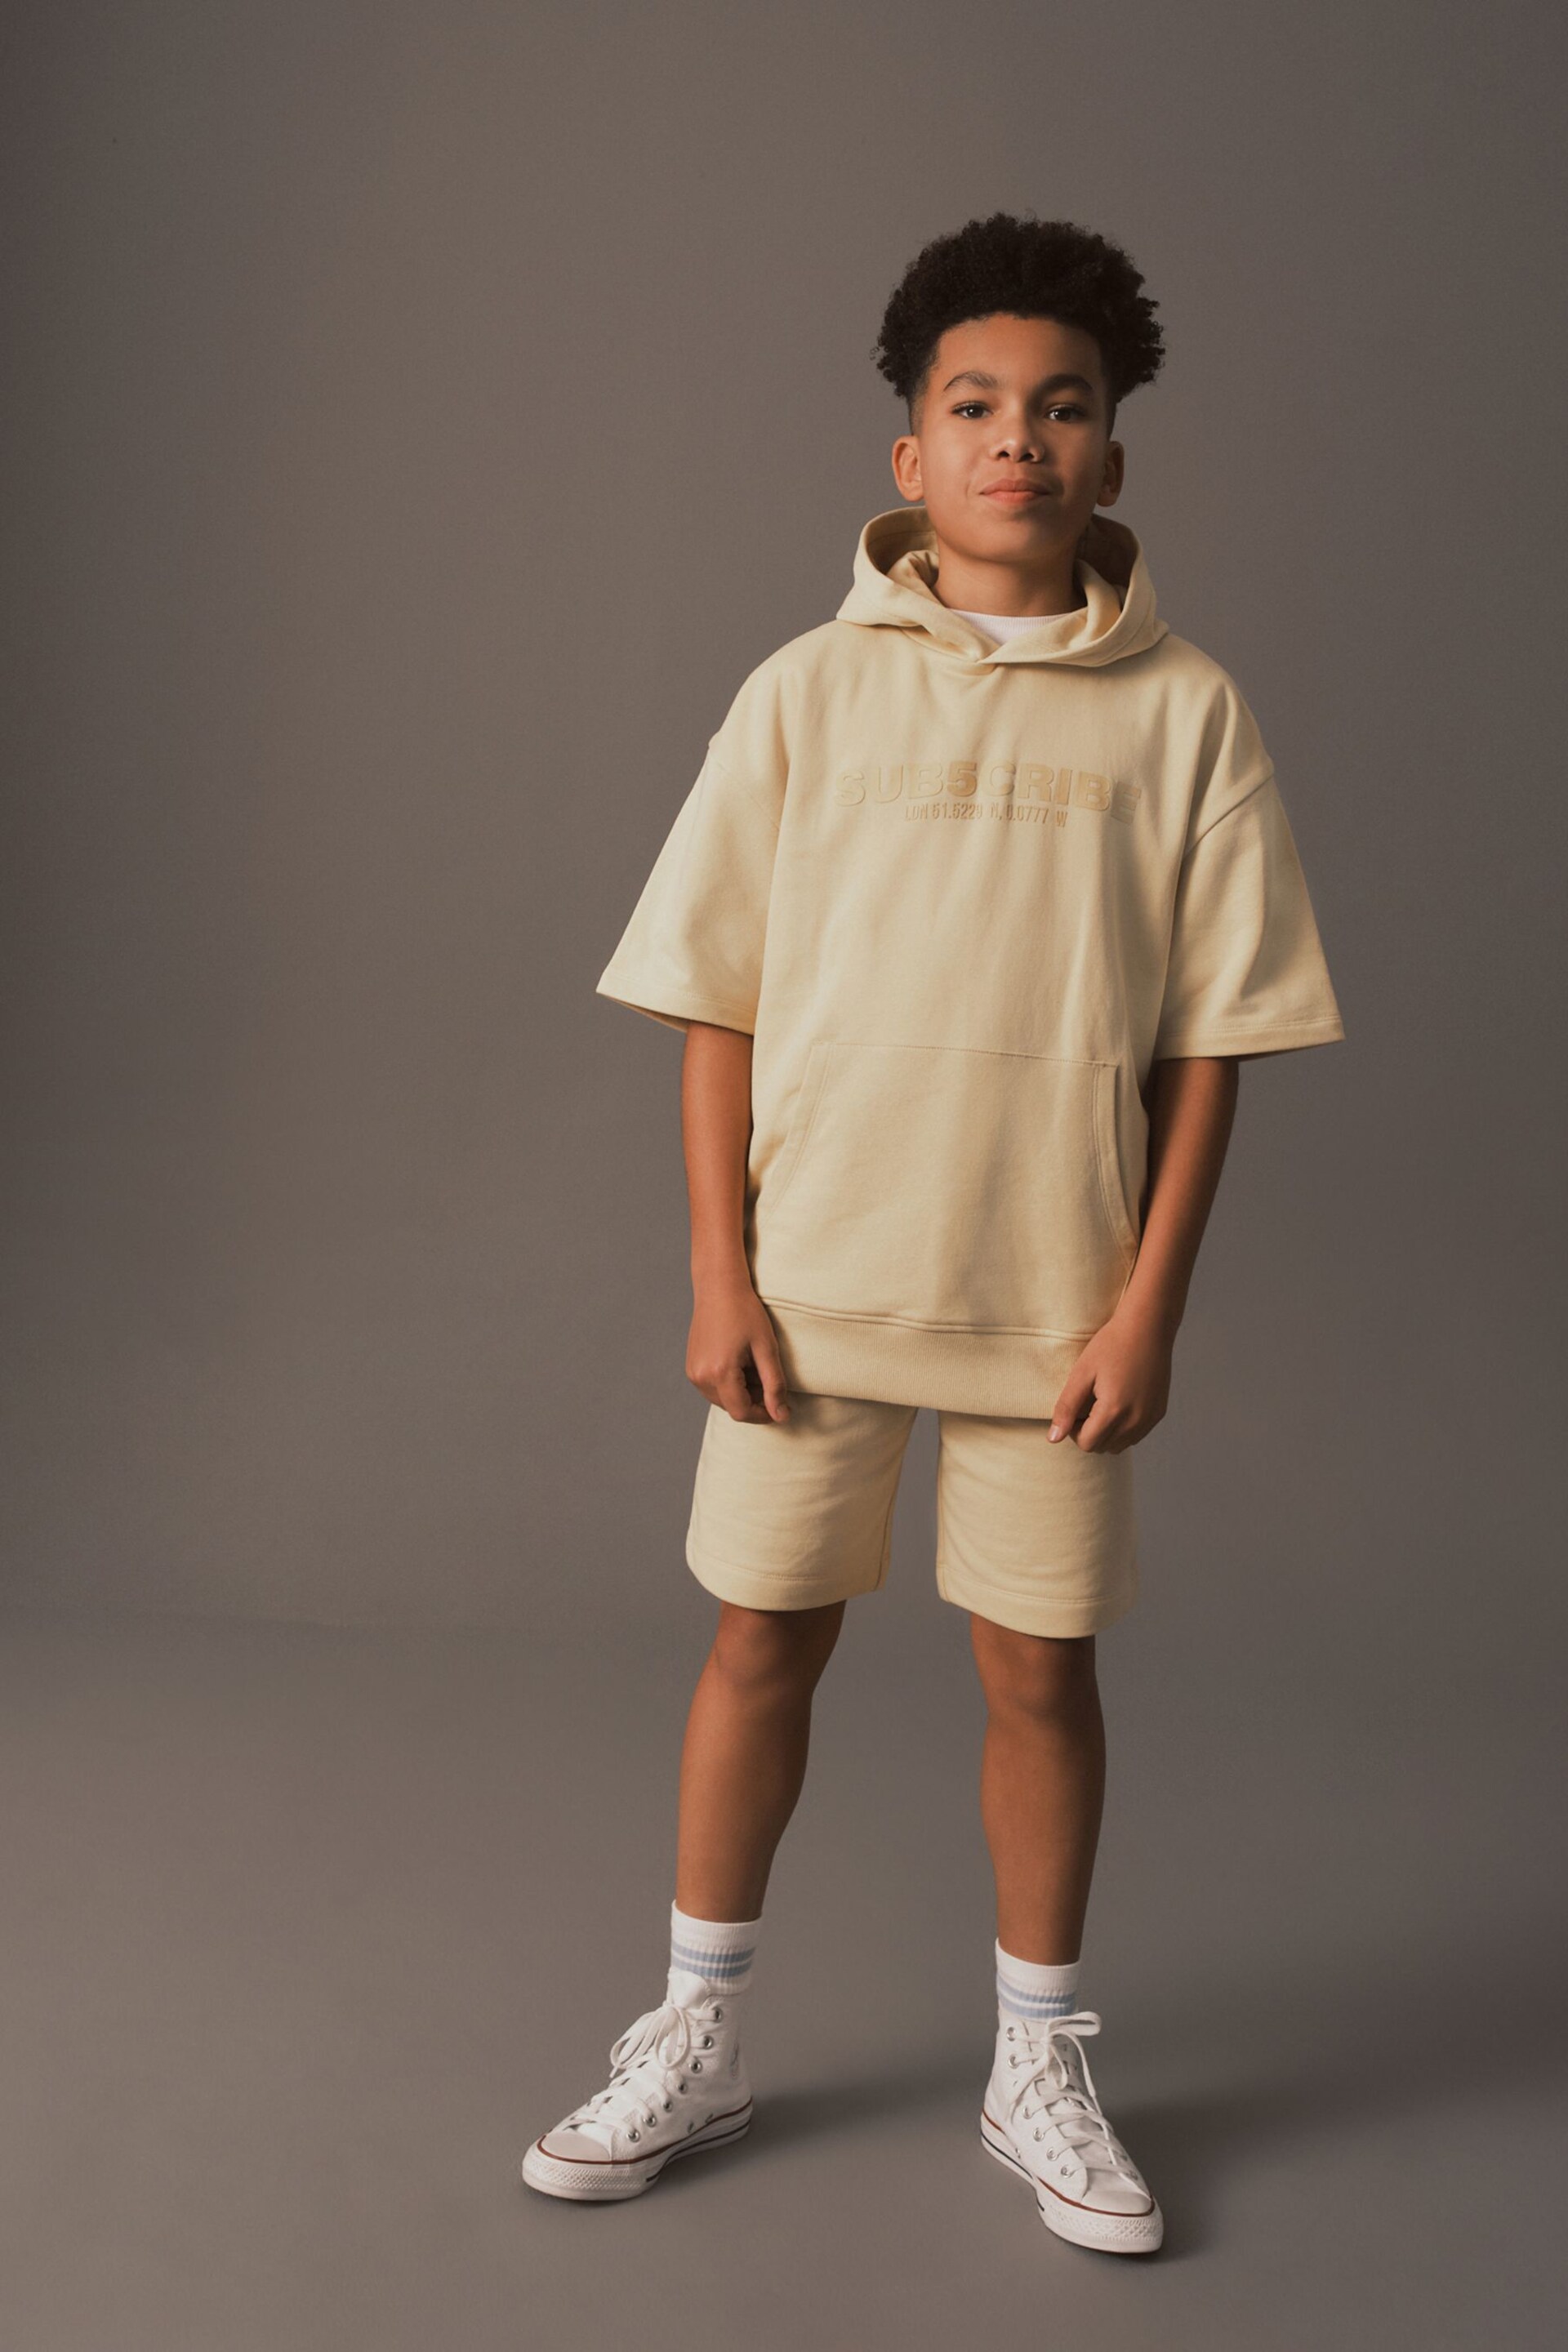 Buttermilk Yellow Short Sleeve Hoodie and Shorts Set (3-16yrs) - Image 1 of 6